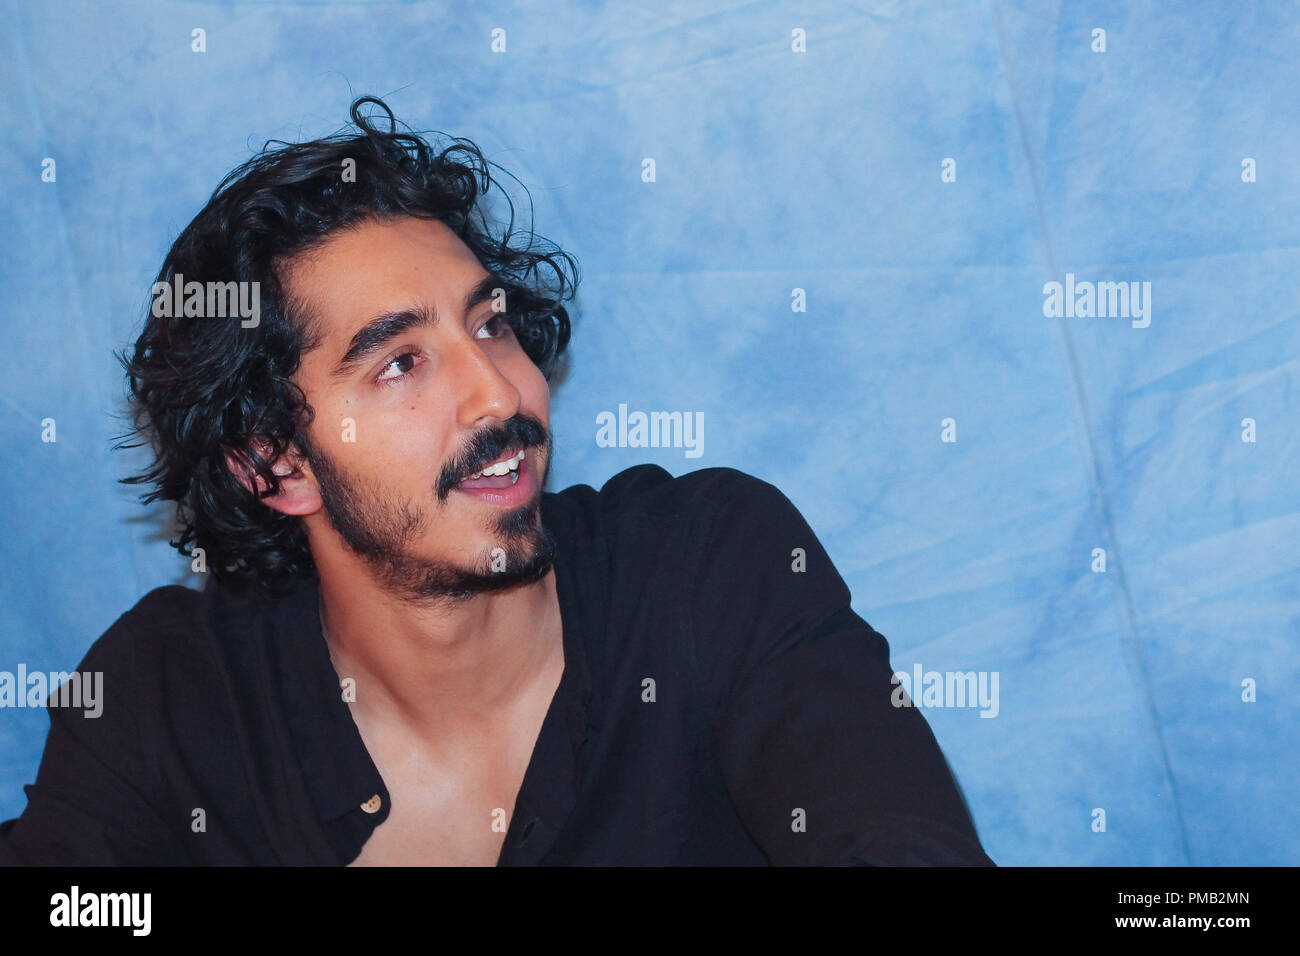 Dev Patel at 'Lion' Press Conference held on November 12, 2016 at the Four Seasons Hotel in Beverly Hills,  California. No Tabloids. No USA sales for 30 days of origination.  File Reference # 33163 029JRC  For Editorial Use Only -  All Rights Reserved Stock Photo